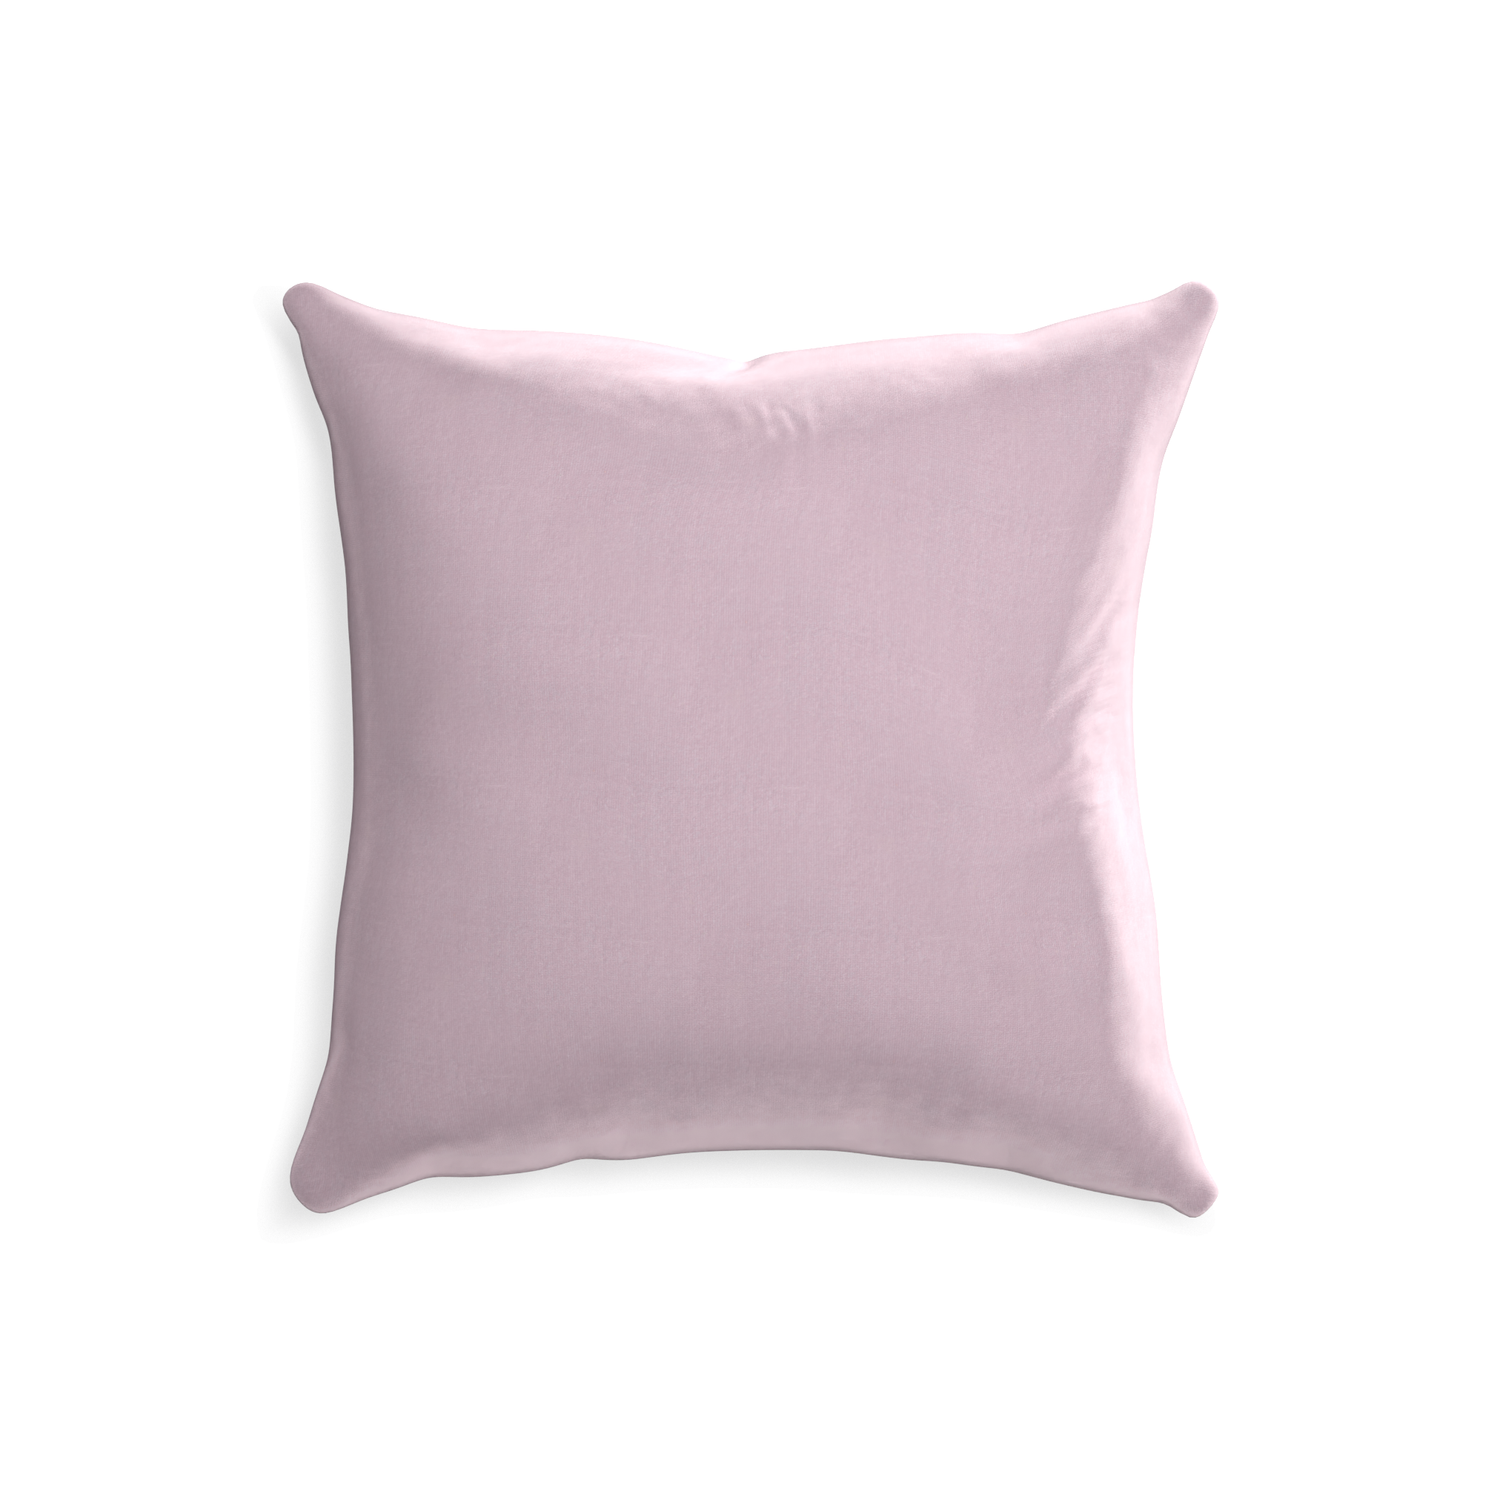 20-square lilac velvet custom pillow with none on white background